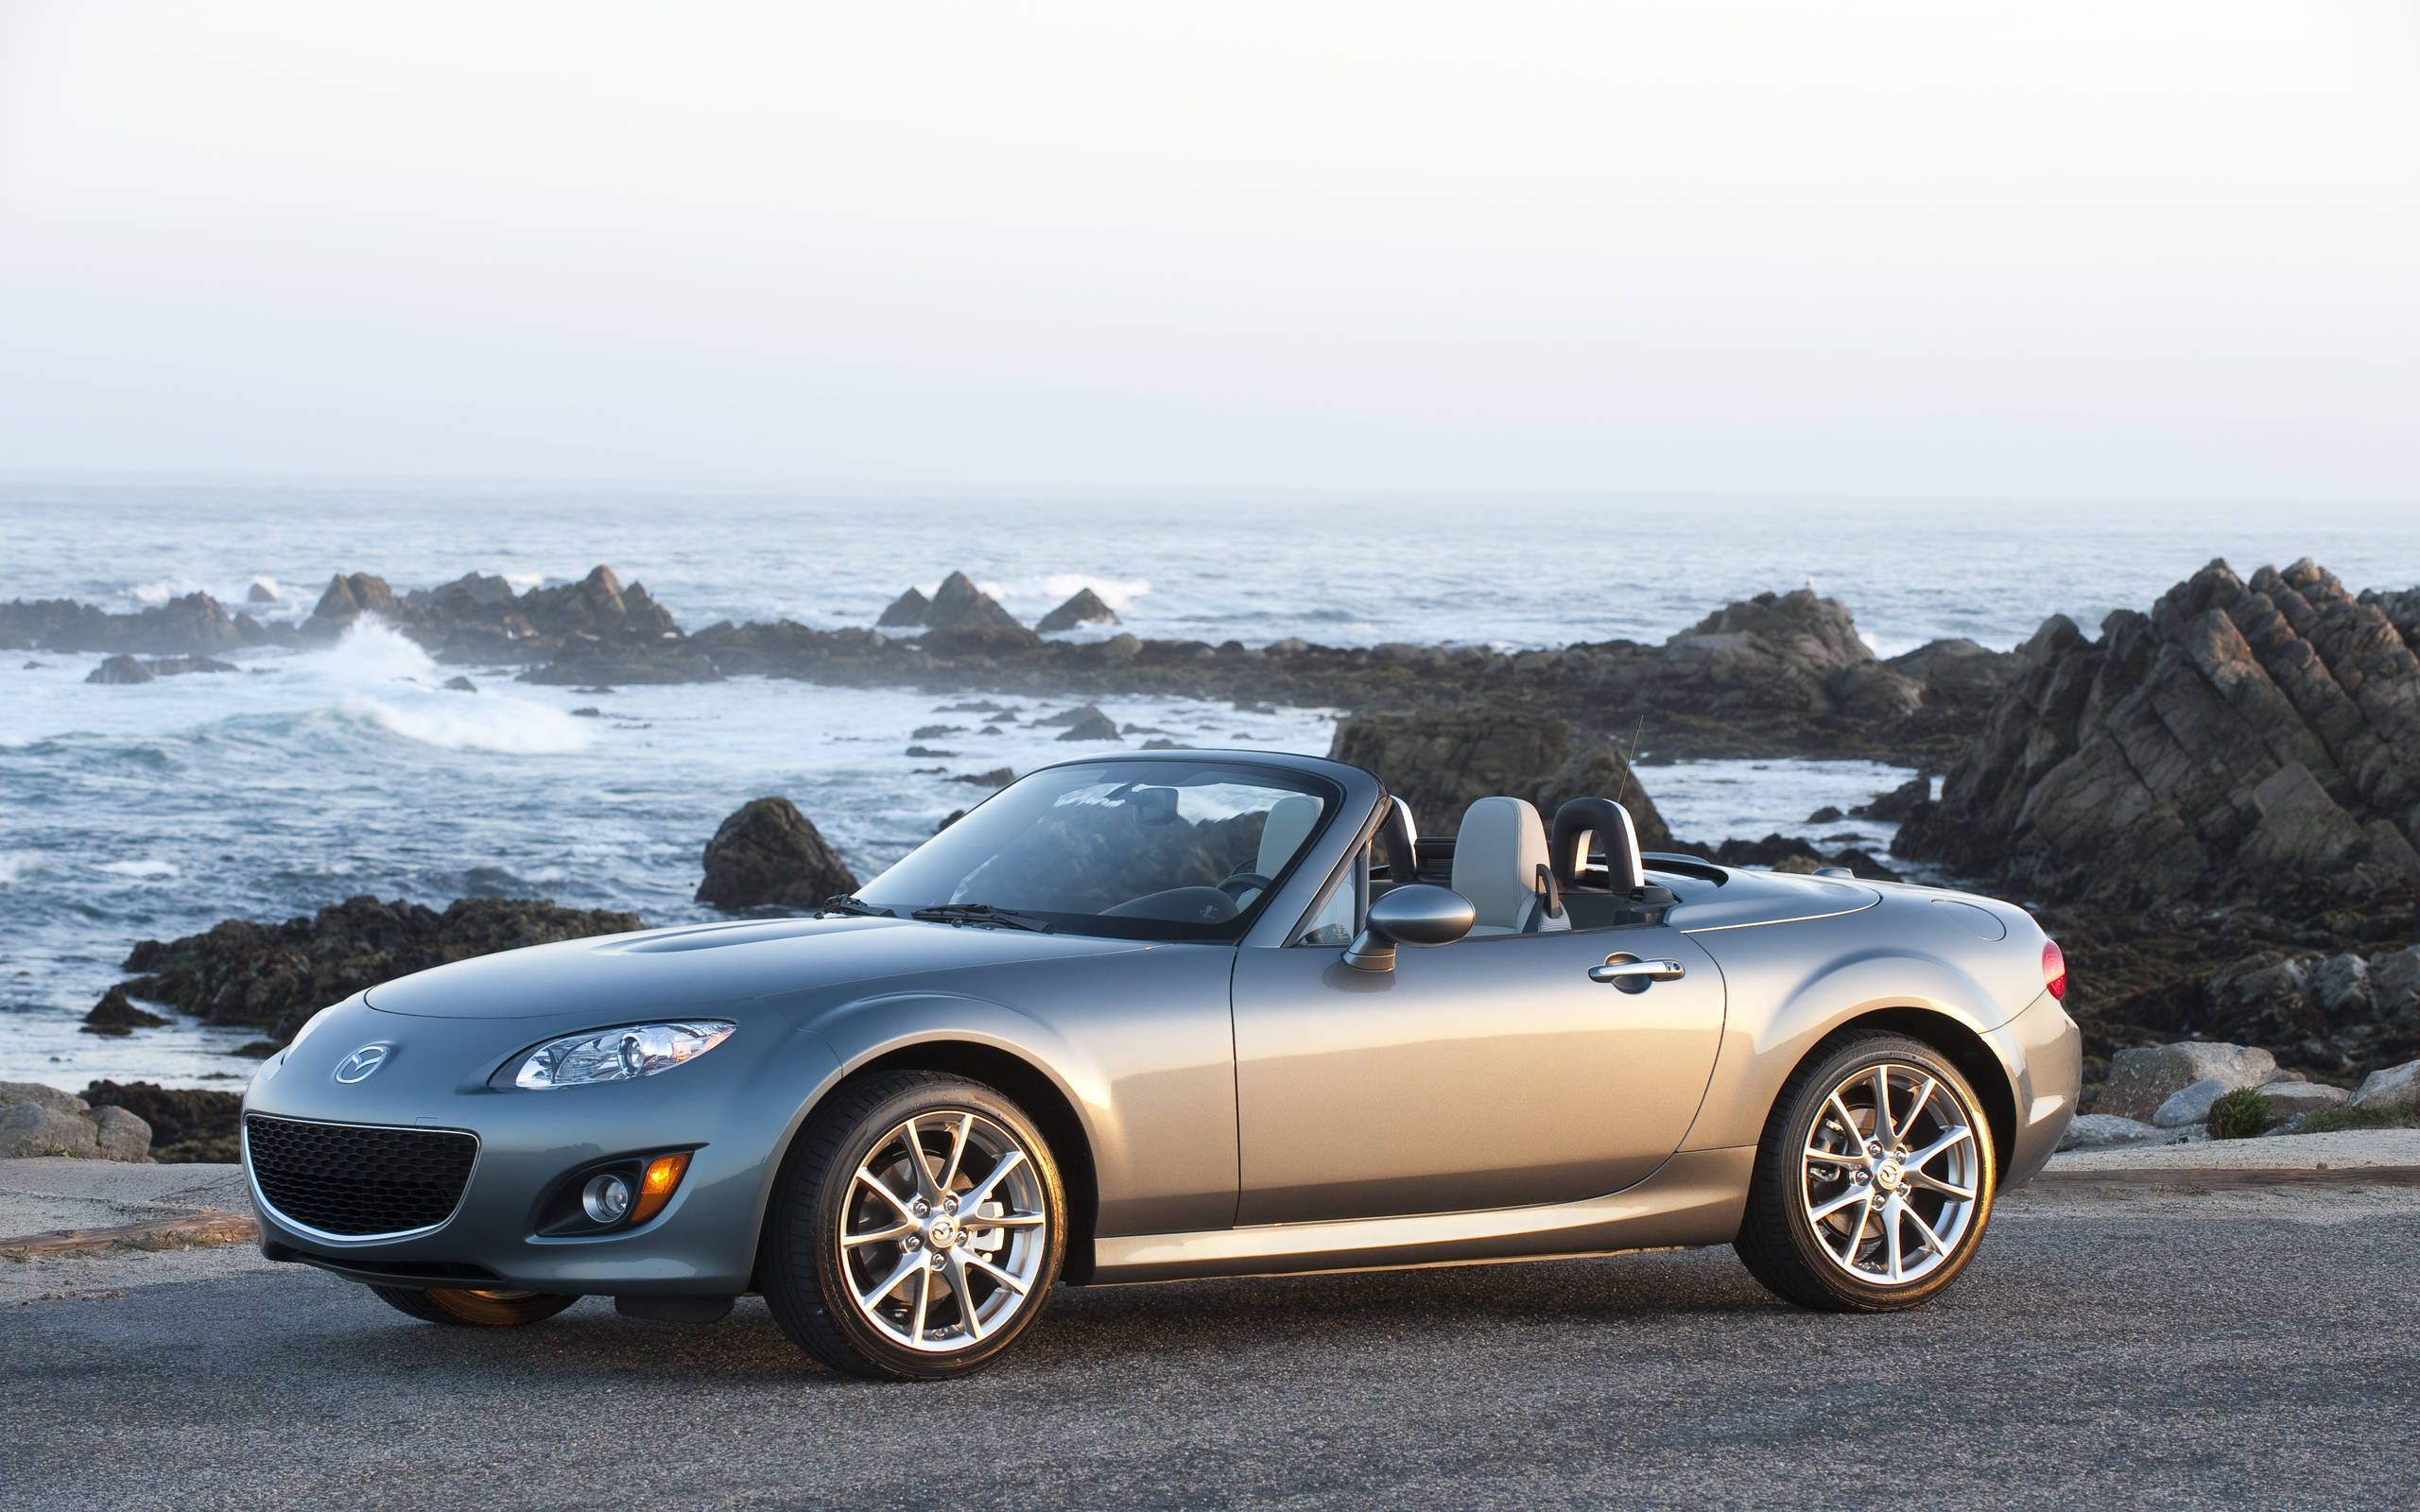 04-The-Most-Reliable-Cars-Revealed-Mazda MX-5